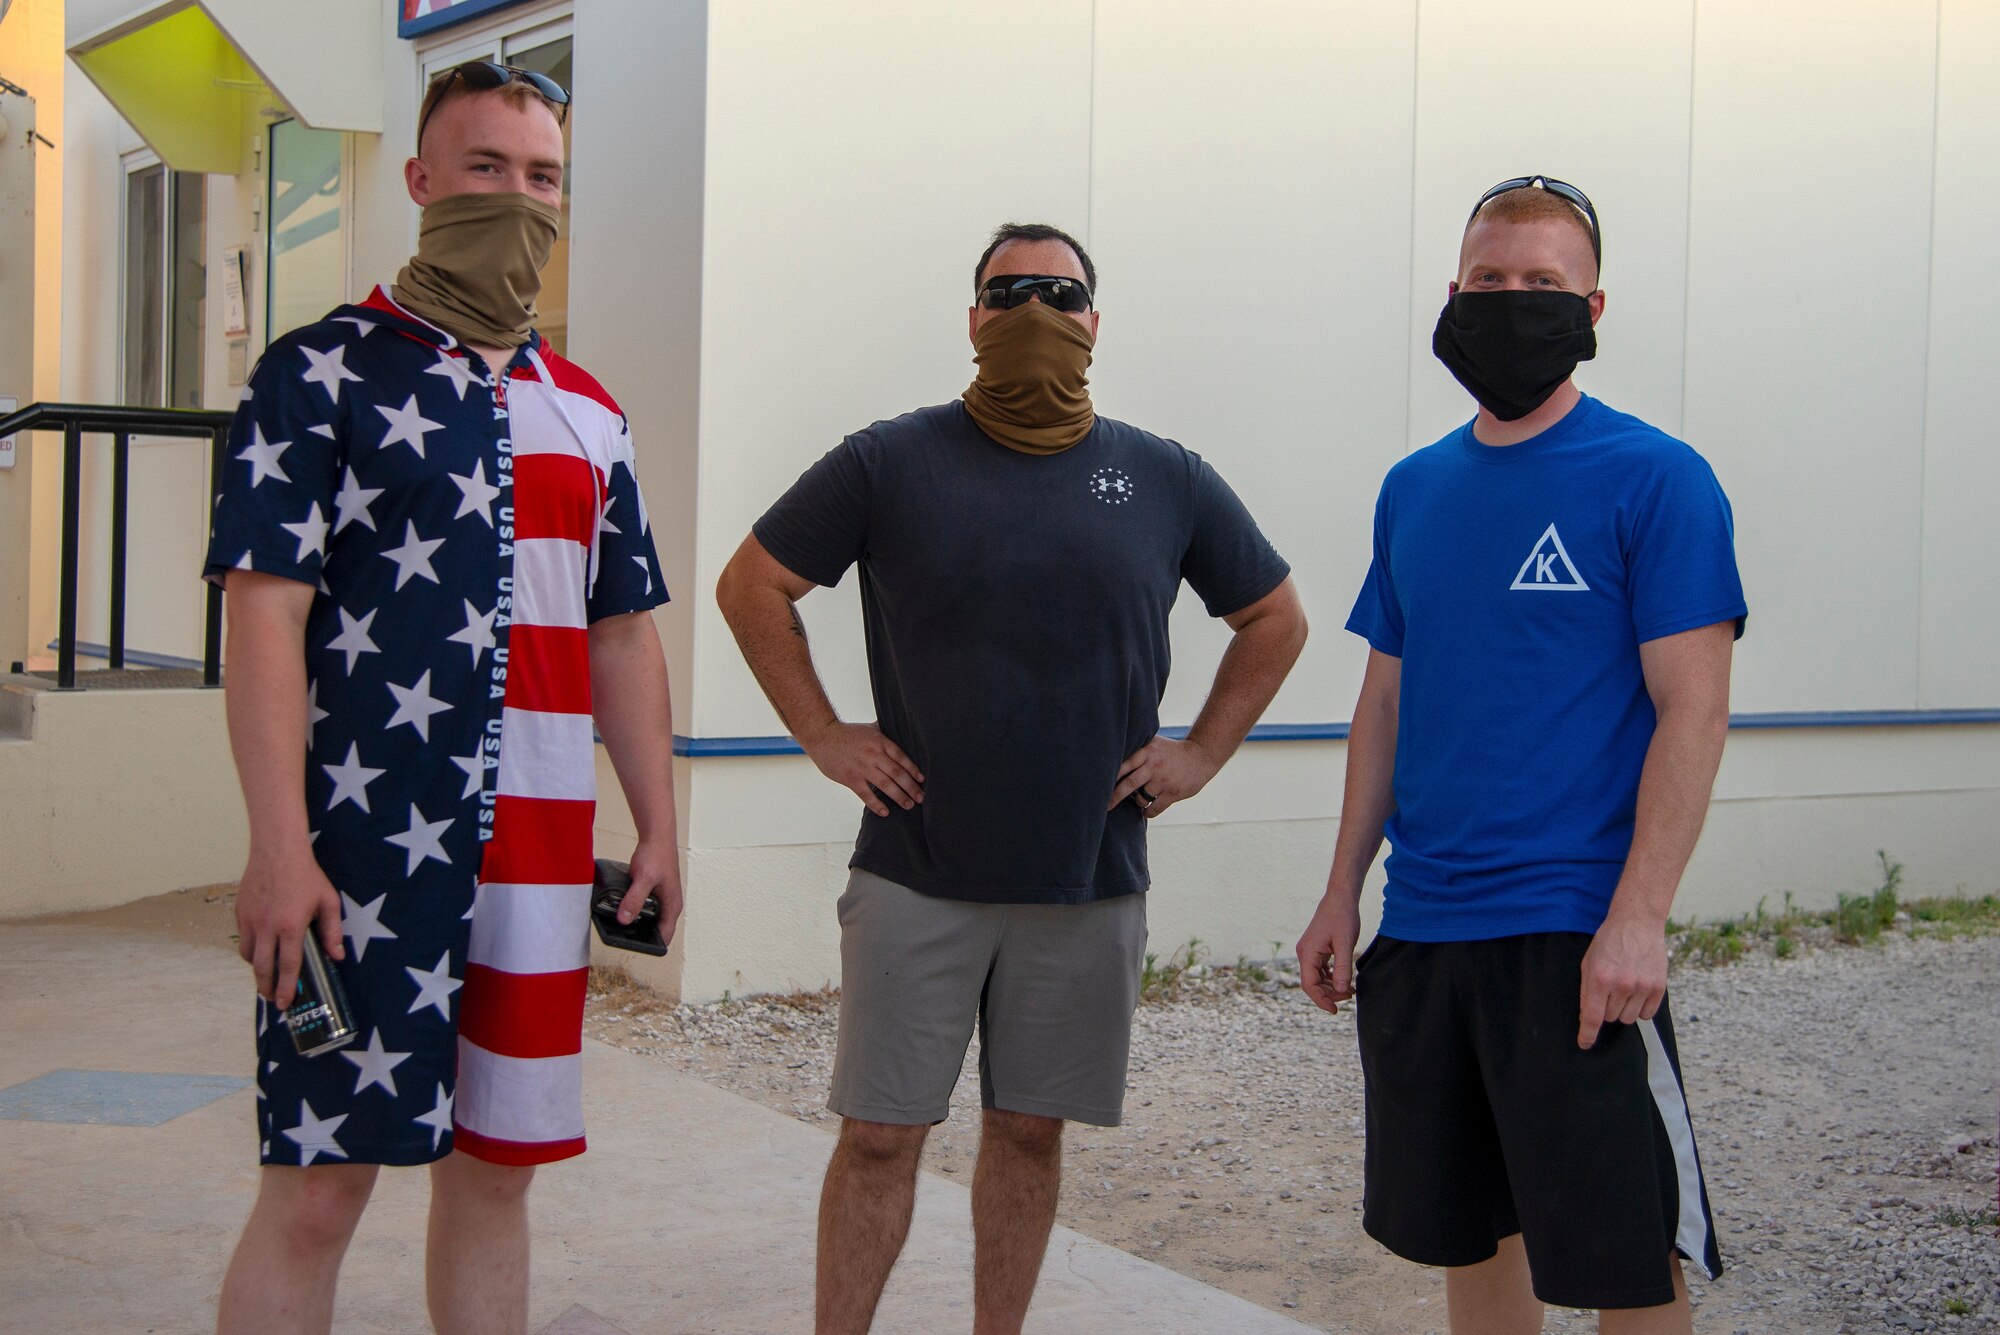 379th Expeditionary Maintenance Squadron Aerospace Ground Equipment members Senior Airman Jeffery Pentland (left), Staff Sgt. Jake Stevens (middle) and Tech. Sgt. Kevin Lurbbert pose for a photo, July 4, 2020, Al Udeid Air Base, Qatar. Service members across the installation attended events such as a bean bag toss tournament, a talent show and free food service at the Fox Sports Bar.